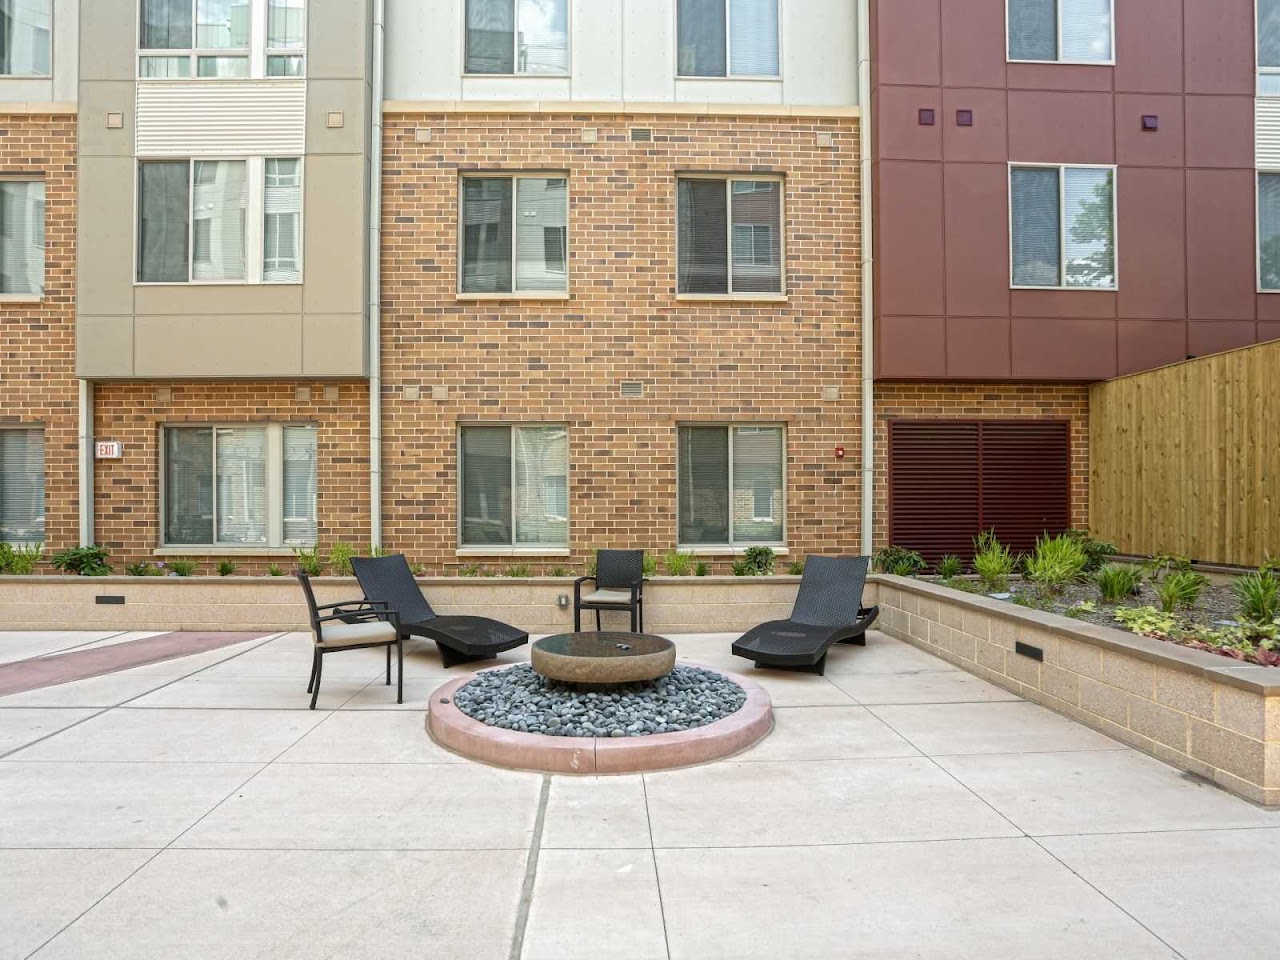 Photo of GROVE AT PARKSIDE. Affordable housing located at 600 KENILWORTH TERRACE NE WASHINGTON, DC 20019